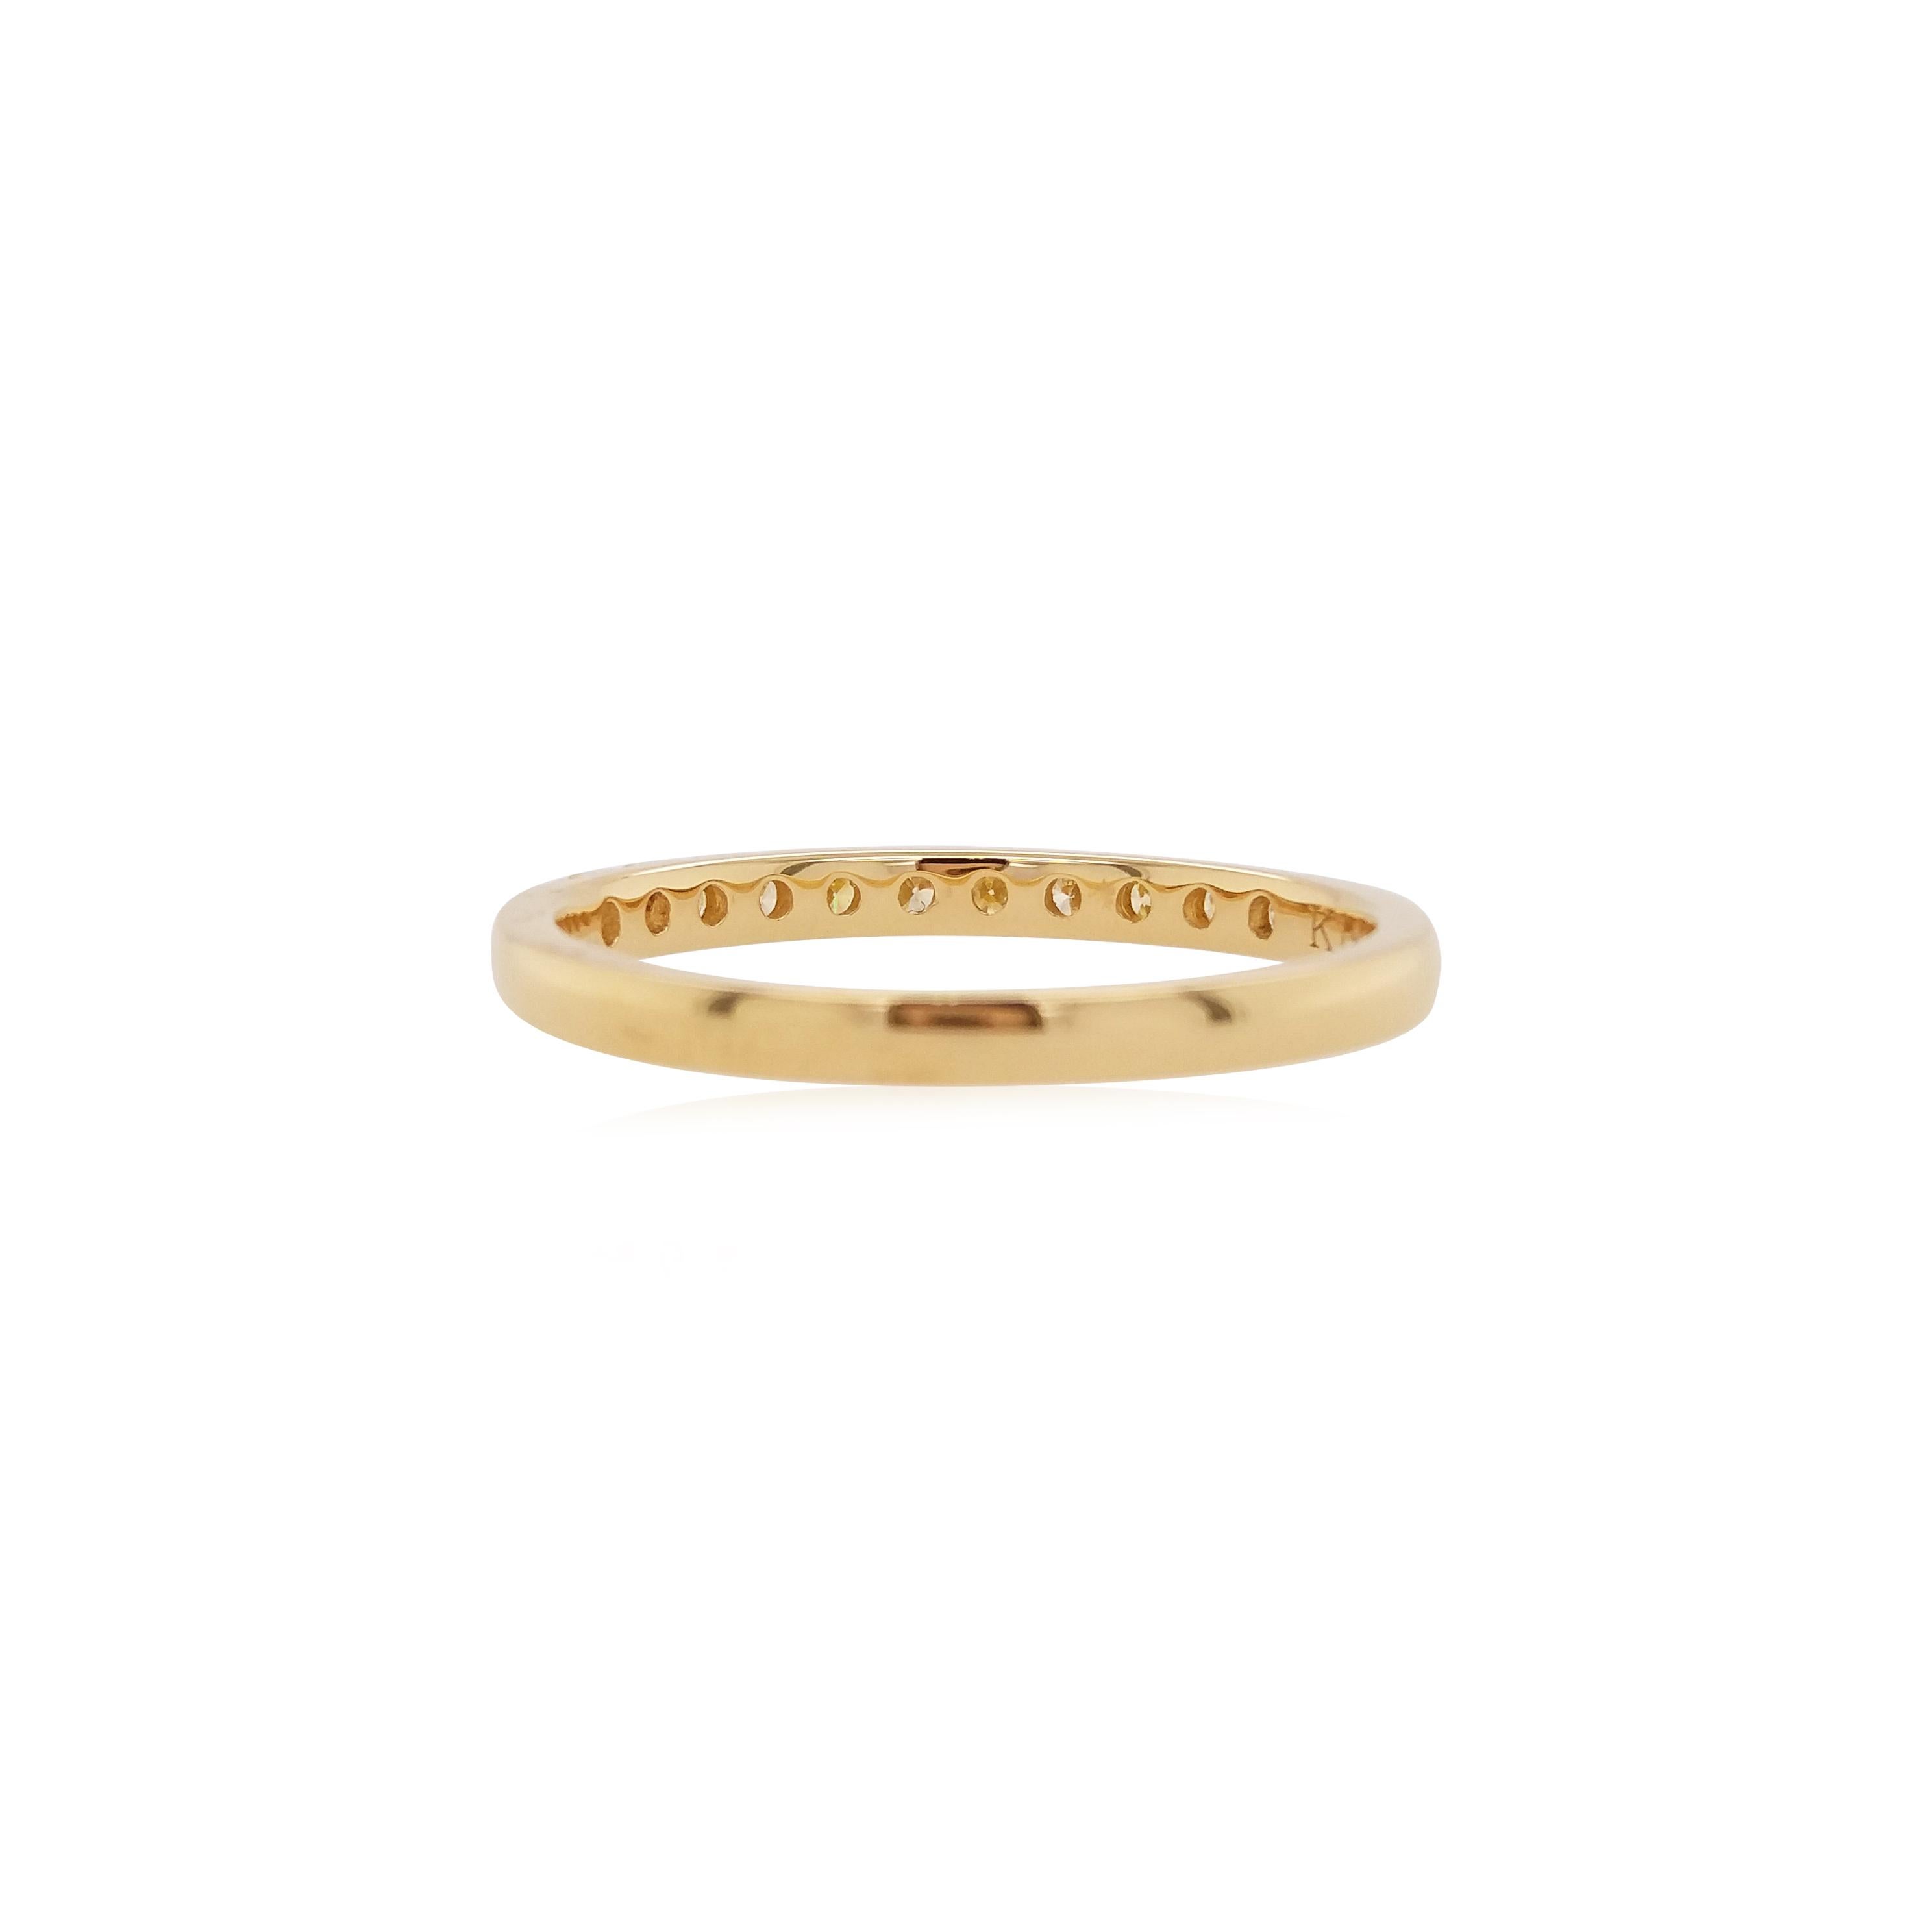 Round Cut Round Brilliant Cut Yellow Diamond Band Ring made in 18K Gold For Sale